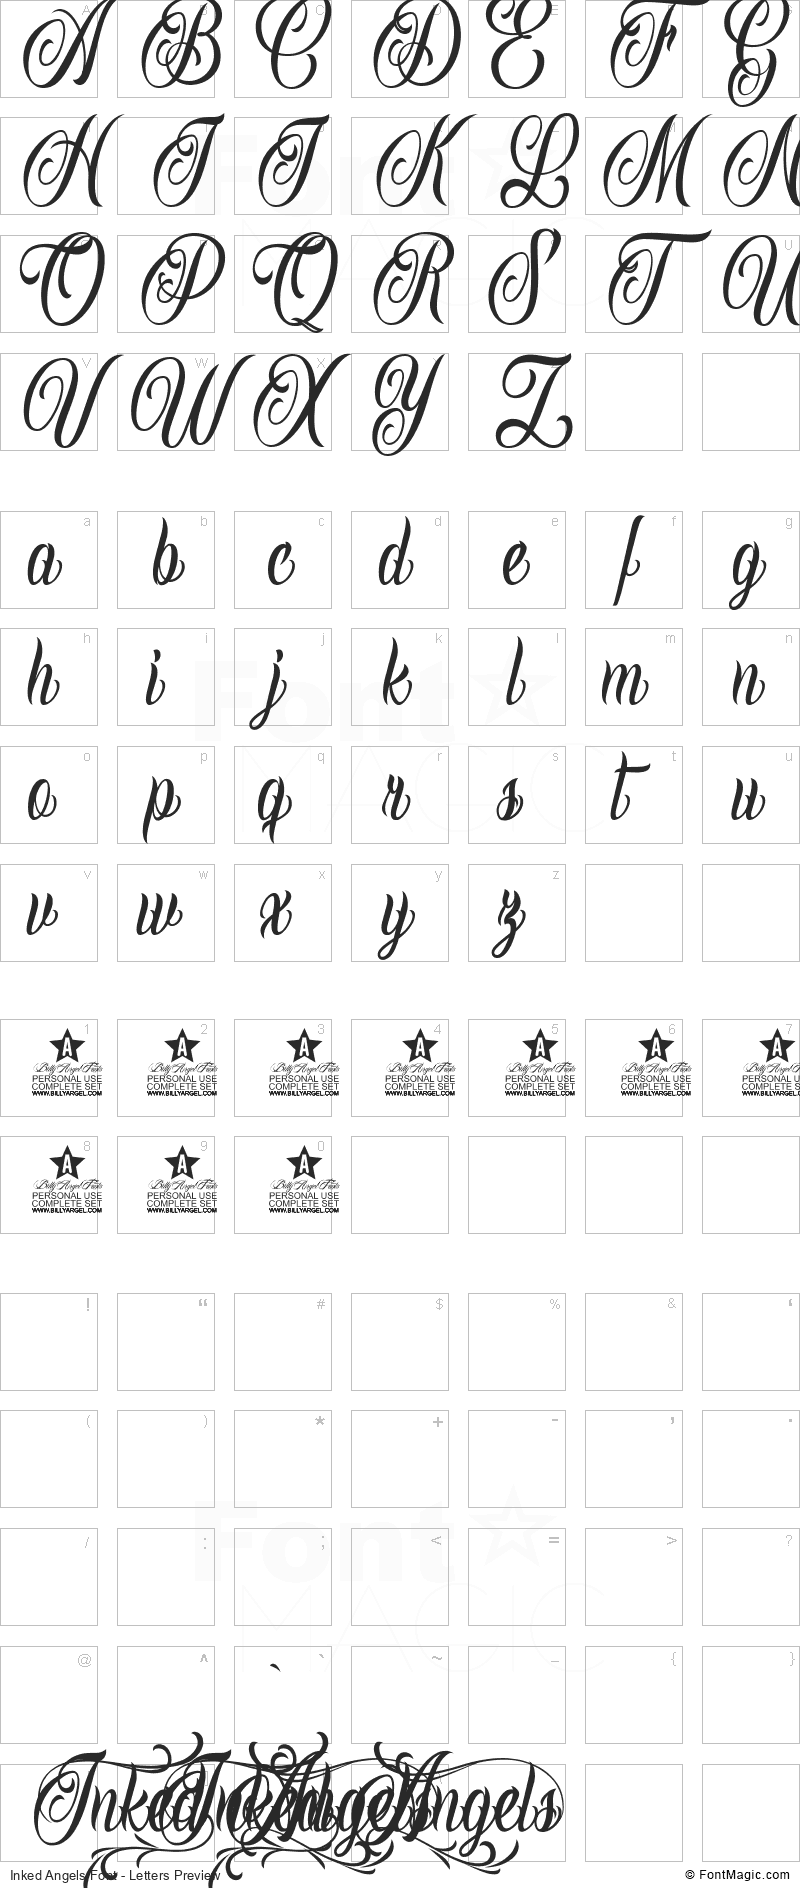 Inked Angels Font - All Latters Preview Chart